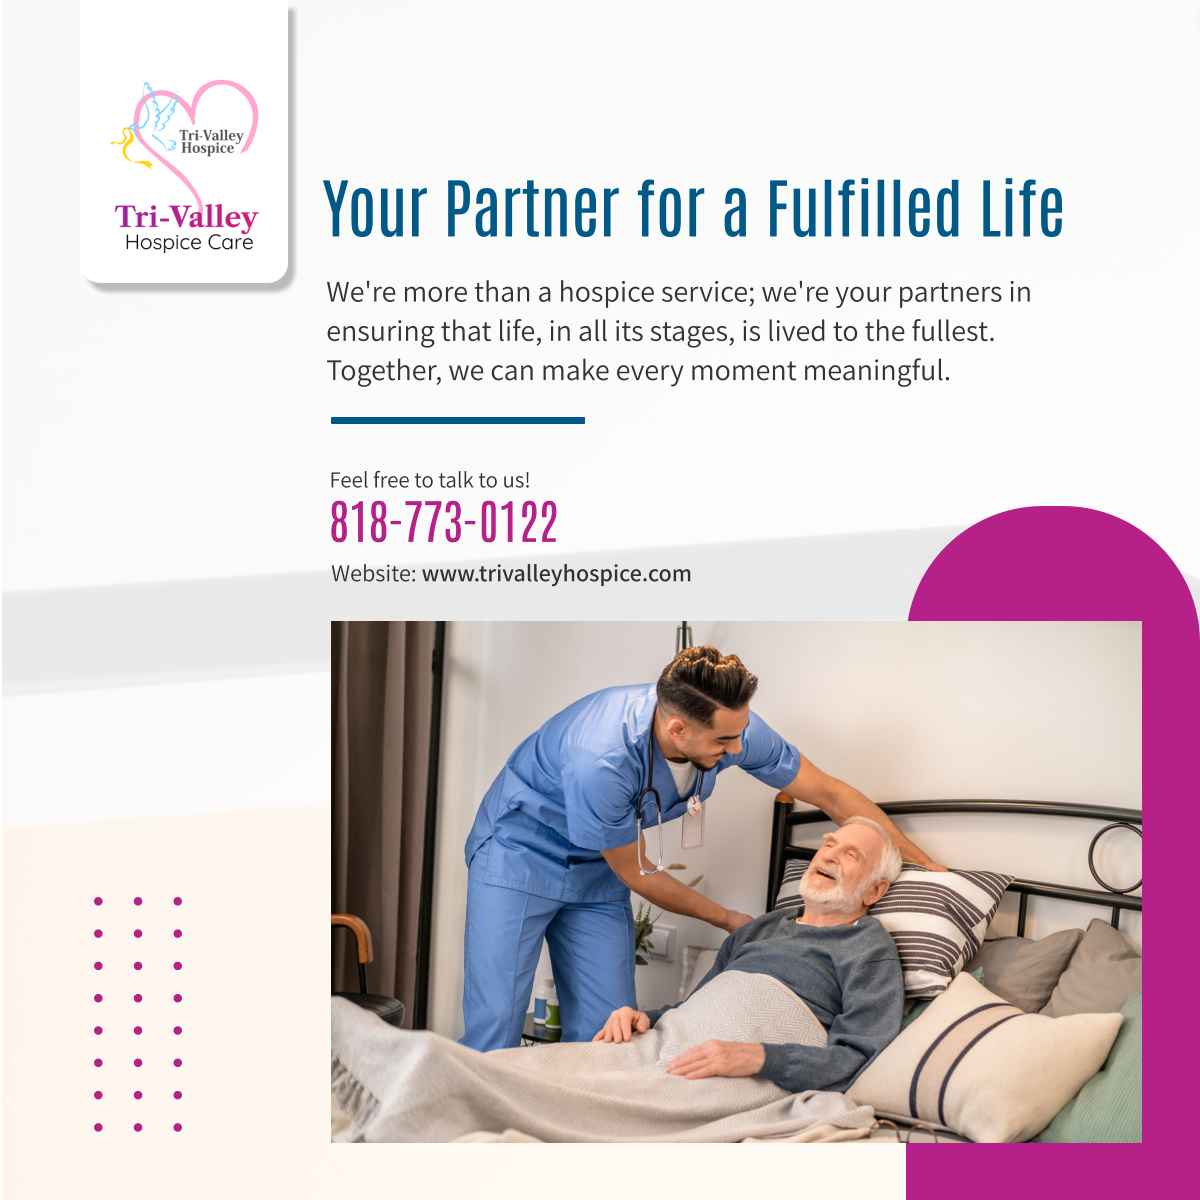 Imagine a partnership that supports not just the physical needs but the heart and soul of your loved ones. We're here to walk this journey with you, ensuring life is cherished and celebrated every step of the way. 

#ChatsworthCA #CarePartner #HospiceCare #HospiceService